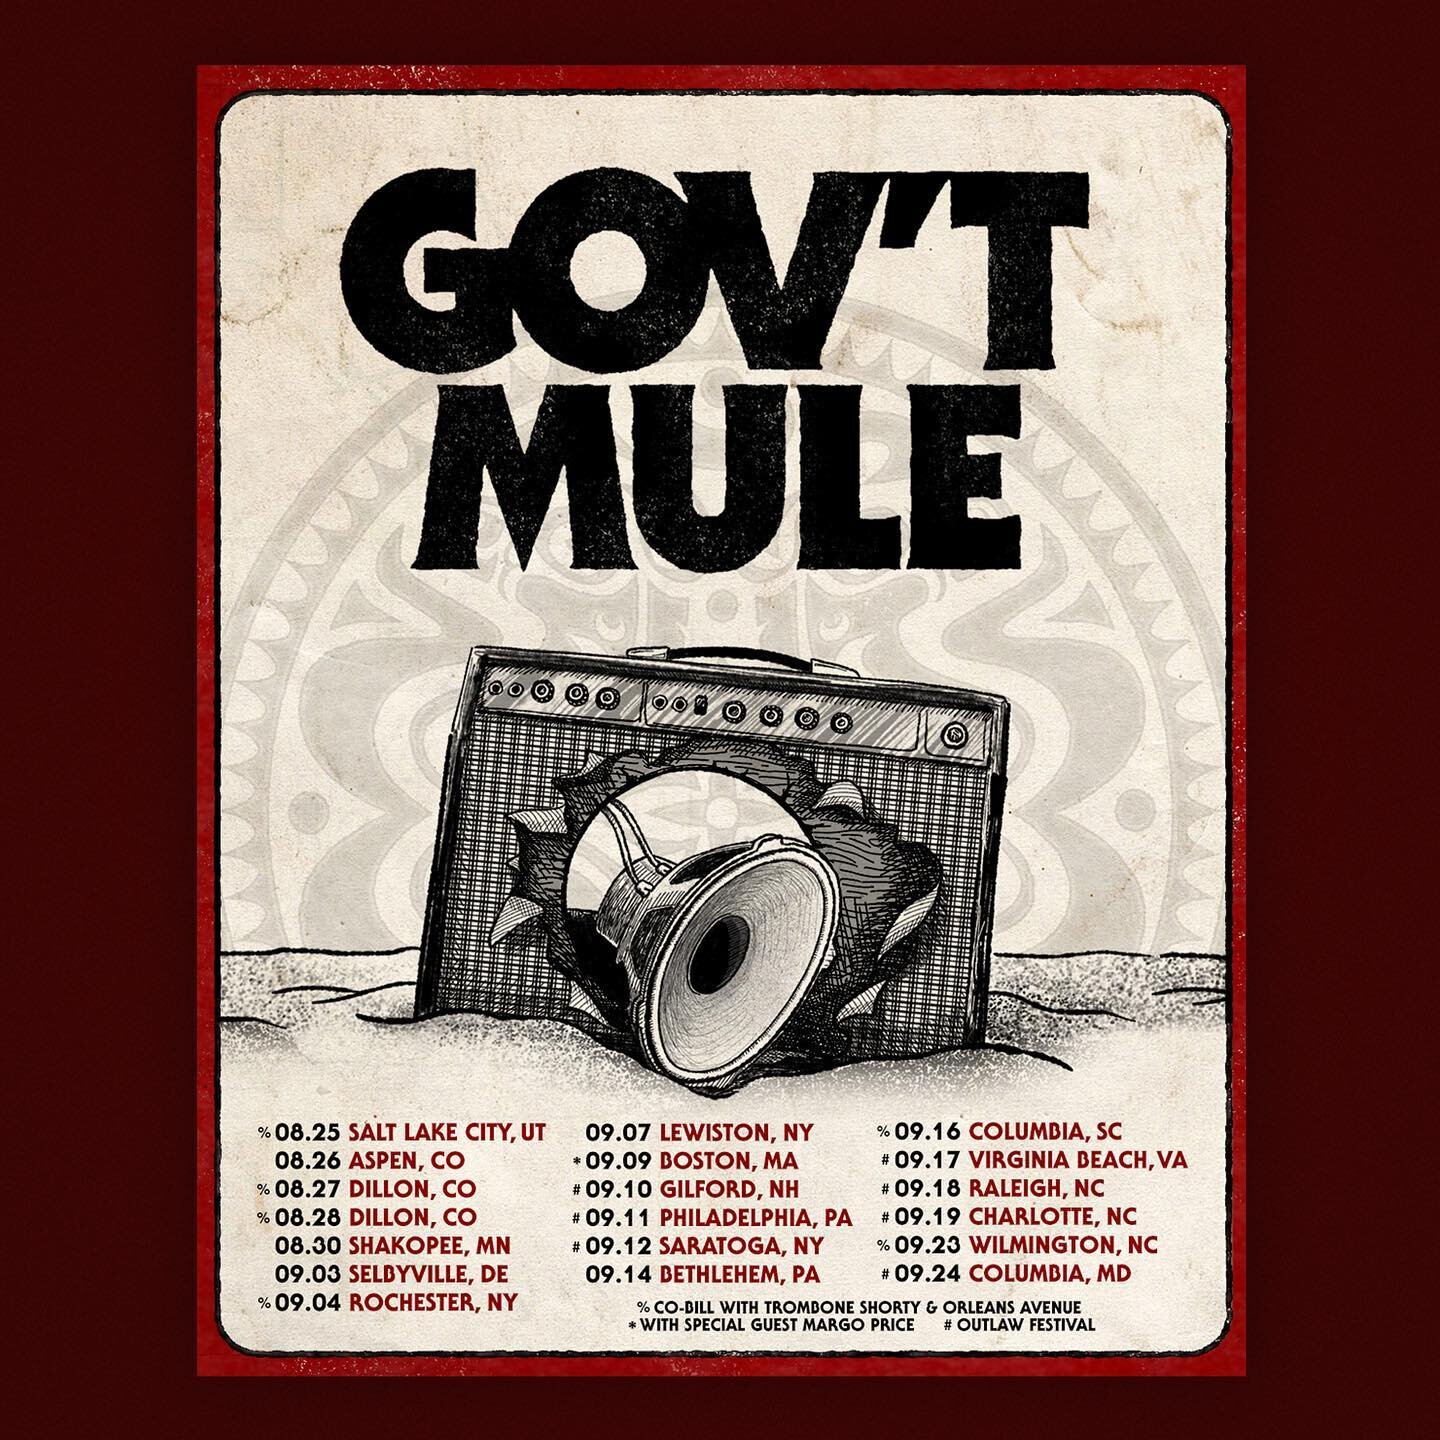 Admat design for @govtmule summer tour which includes headlining shows, a run of co-bill shows with Trombone Shorty and a bunch of Outlaw Music Festival dates. The blown amp illustration is something I originally drew just for fun while watching a mo